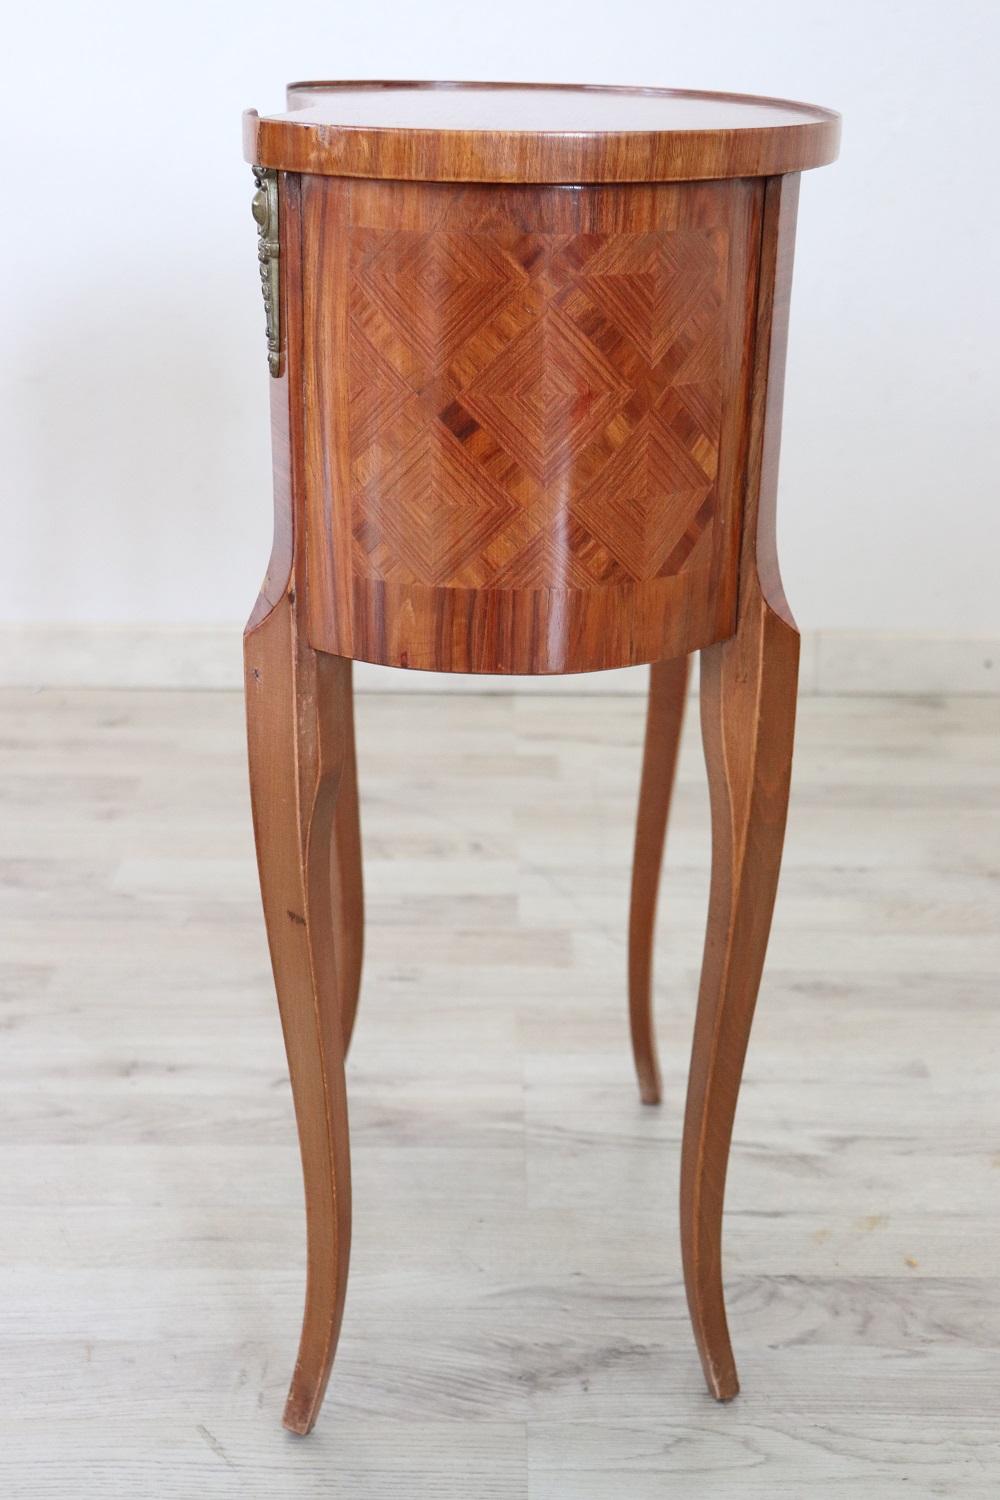 20th Century Italian Louis XV Style Inlay Wood Side Table or Nightstand 2